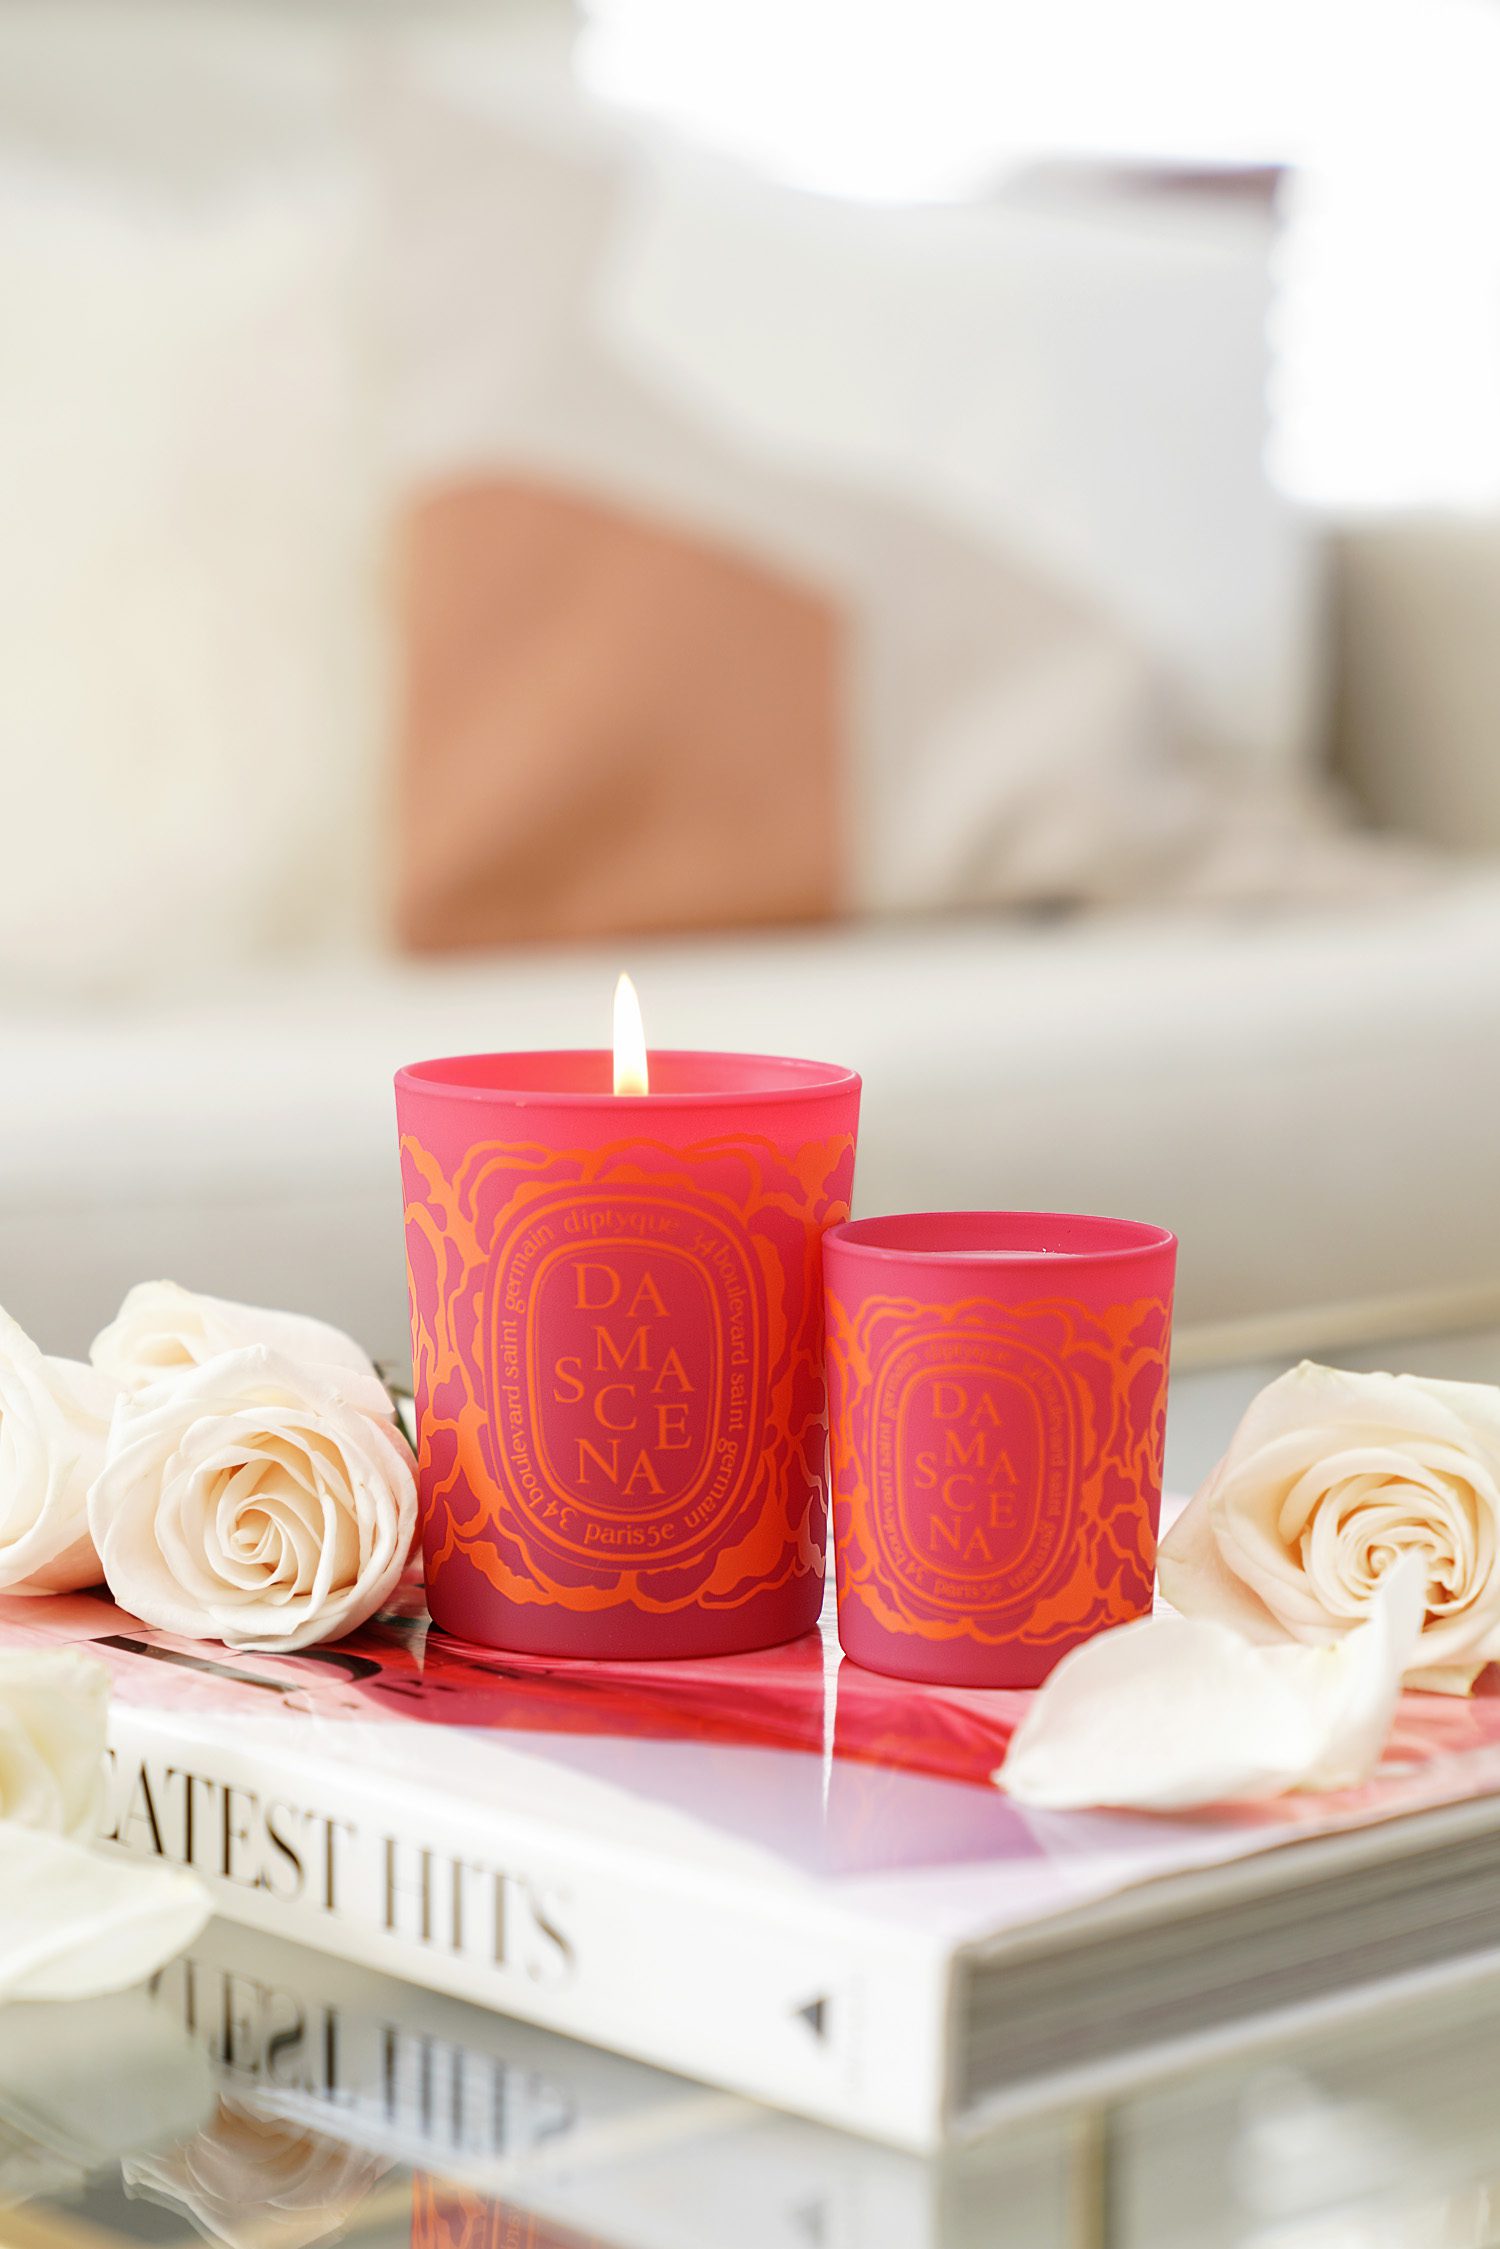 Diptyque Damascena Candle Limited Edition 2.4 oz 70 g 